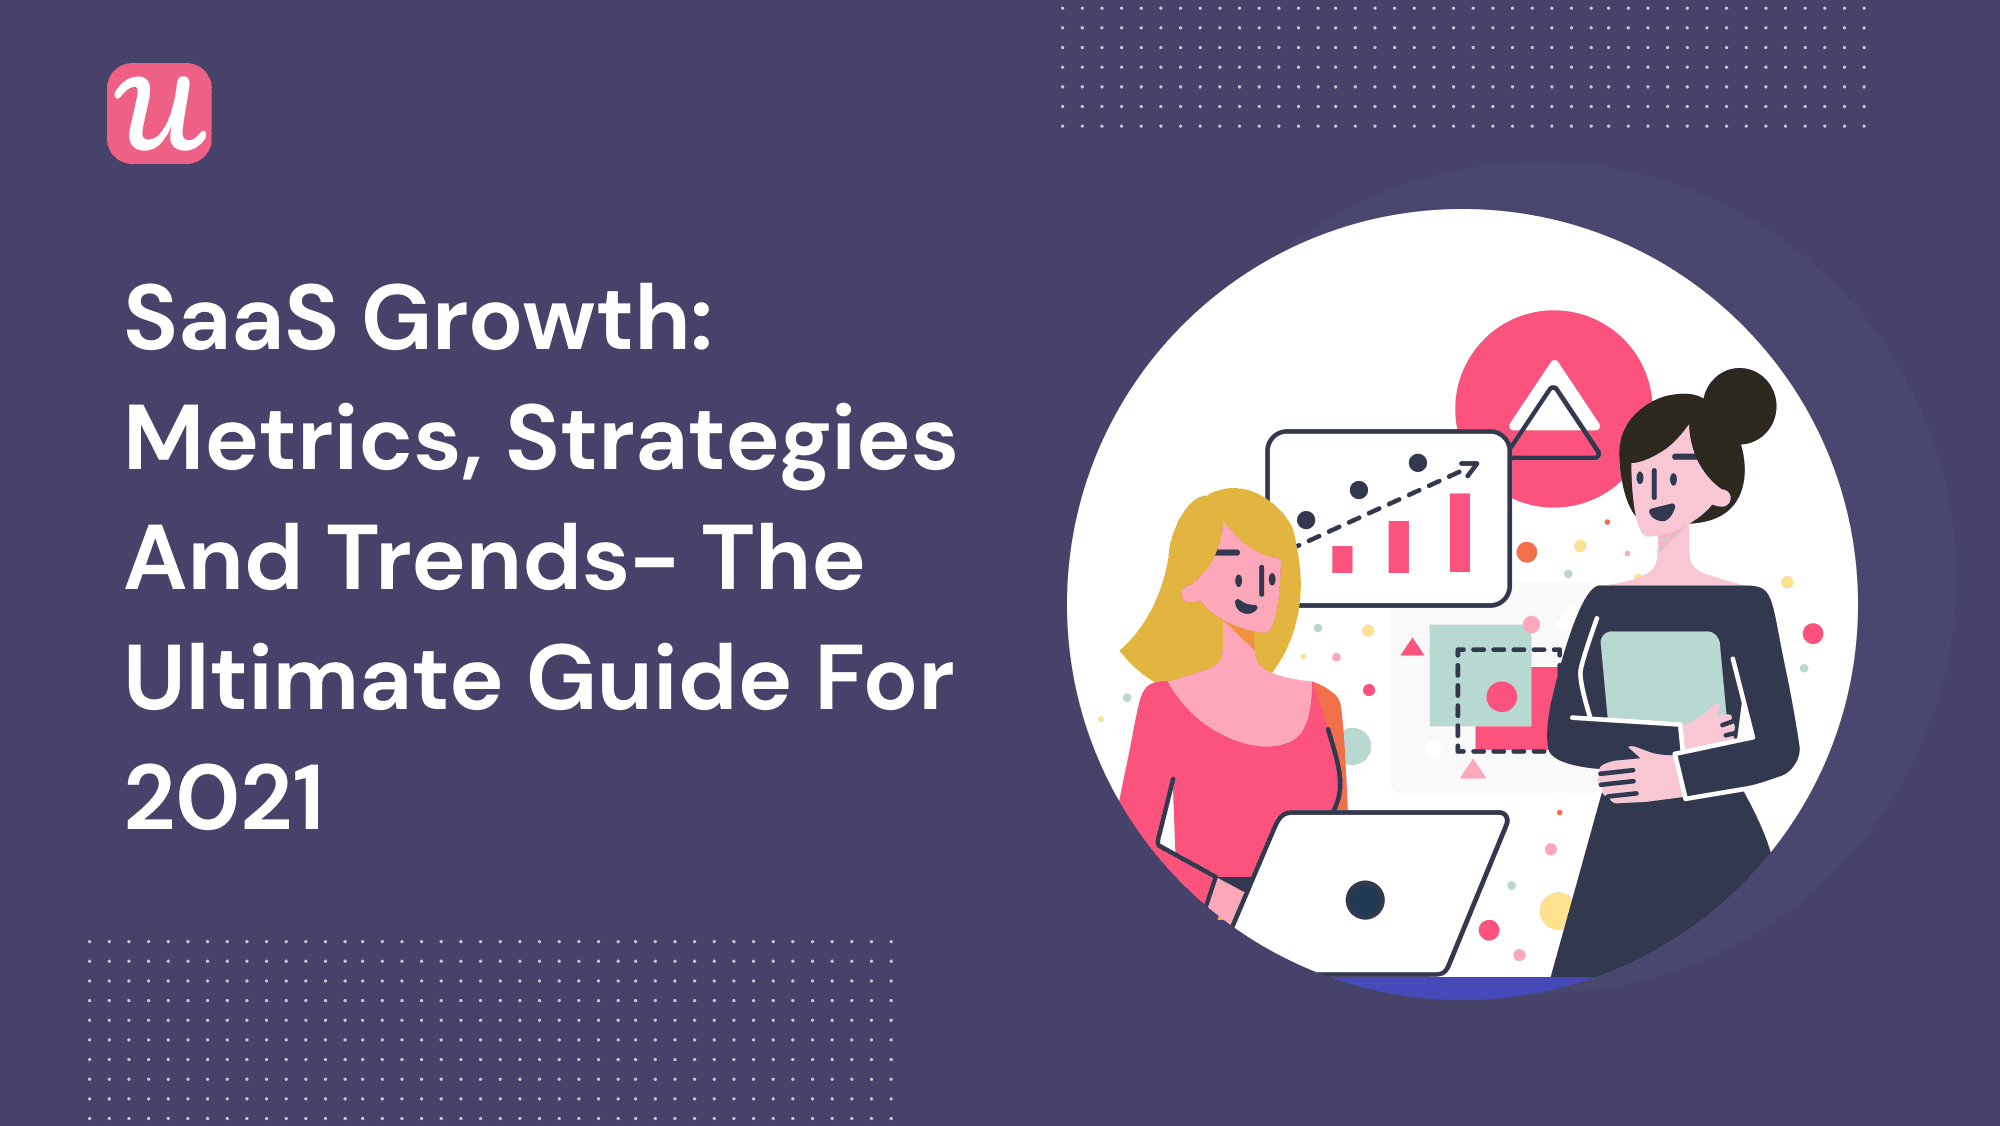 EPIC 6: SaaS Growth: Metrics, Strategies, And Trends – The Ultimate Guide For 2021